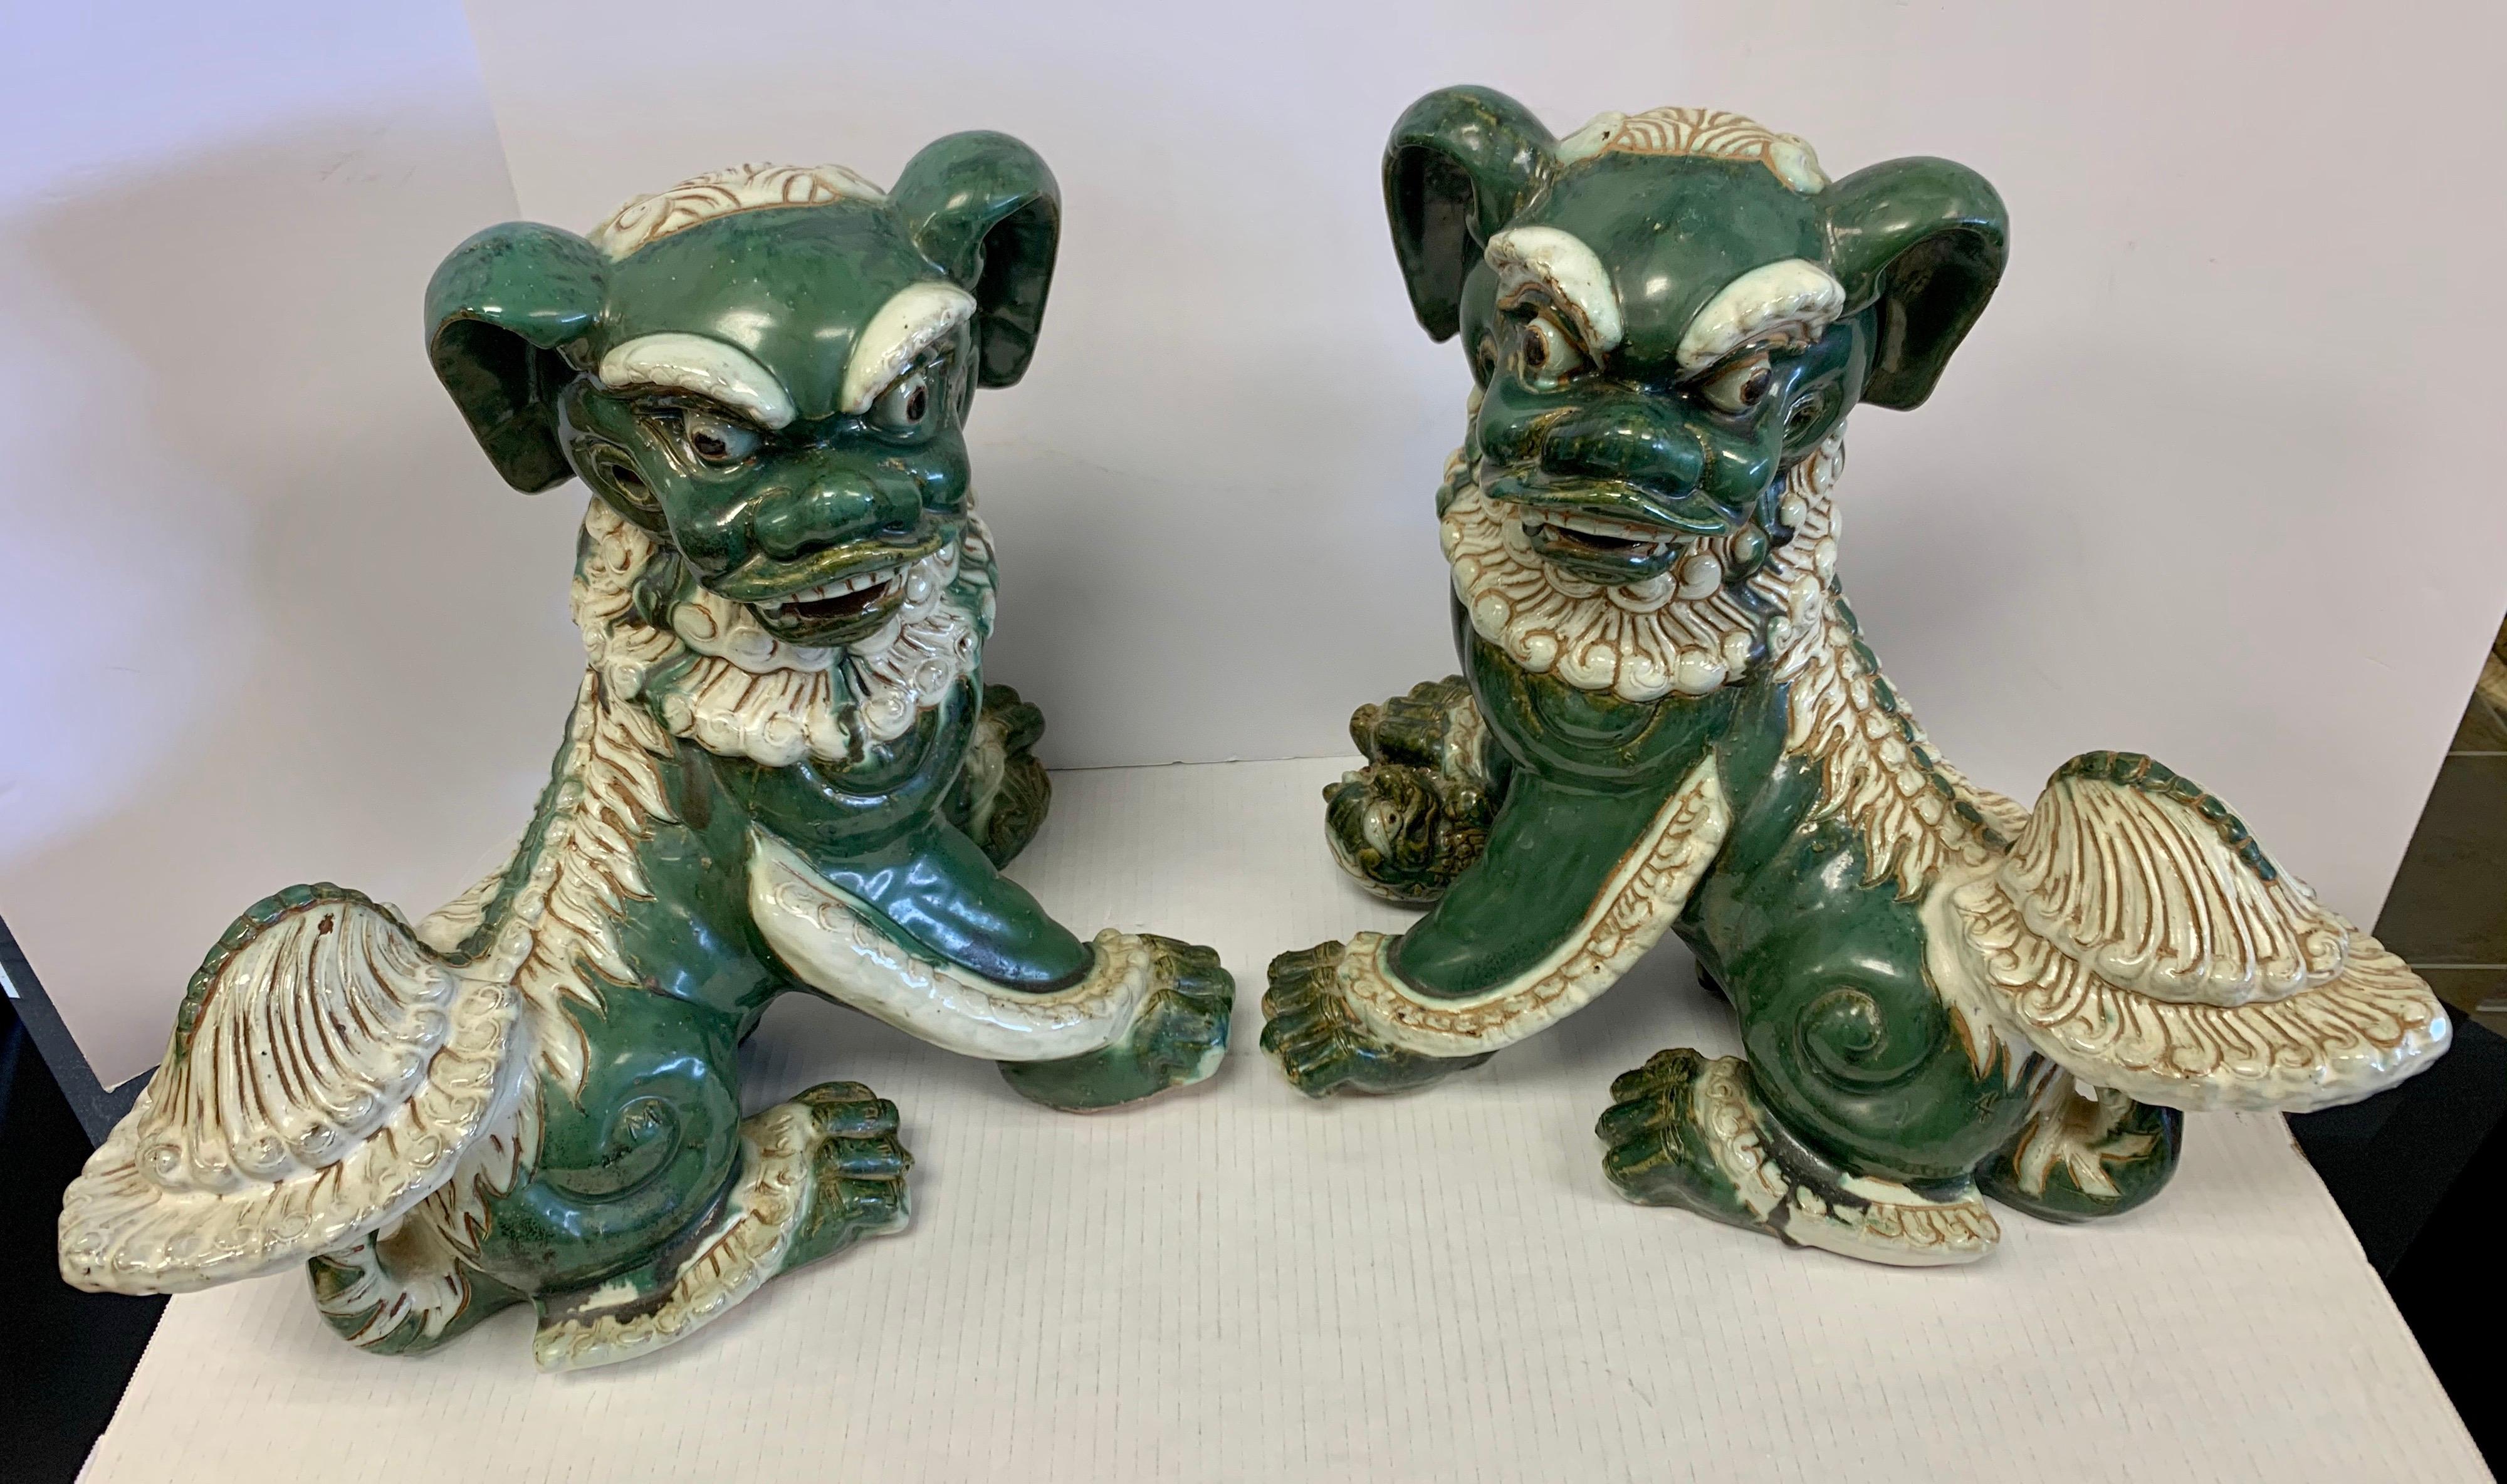 Magnificent pair of fine glazed porcelain Foo dogs from a Central Park West home. As admirers of Foo Dogs know, they were used to guard the entryway to temples and homes of the very rich, as such, they were guardian lions of the Far East. Paired